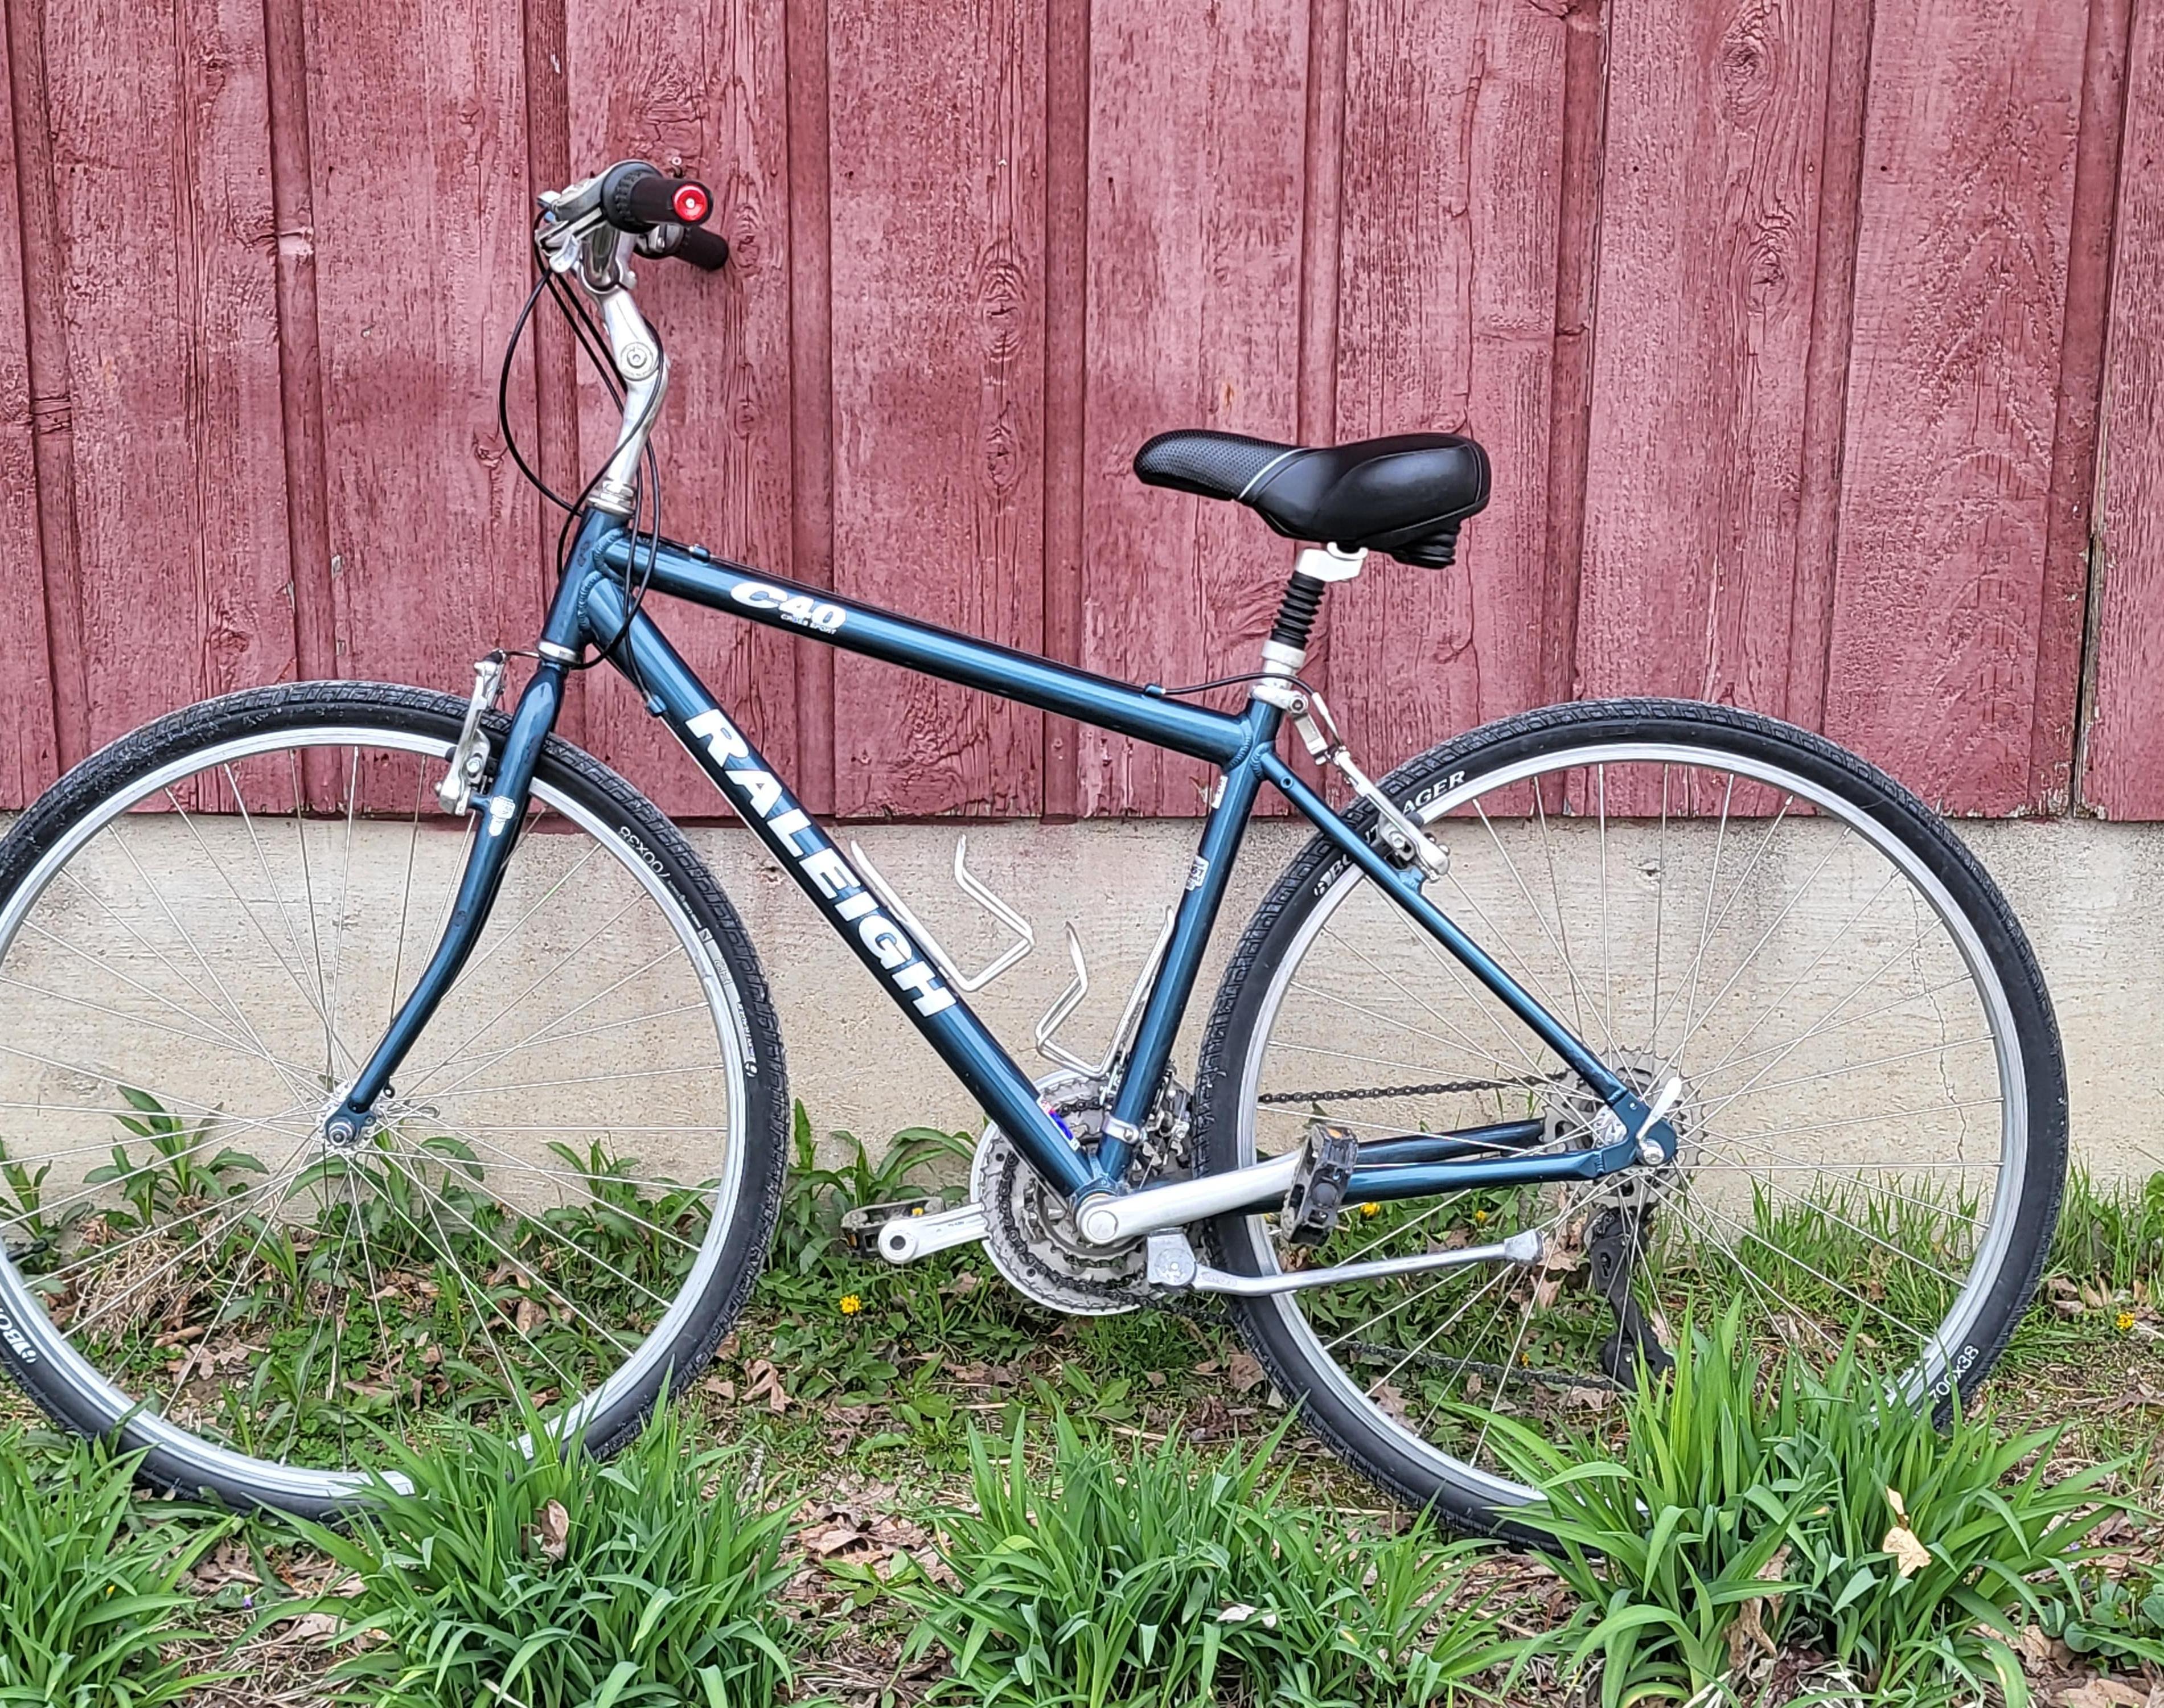 Restore a Bike's Finish by Mixing Touch-up Paint